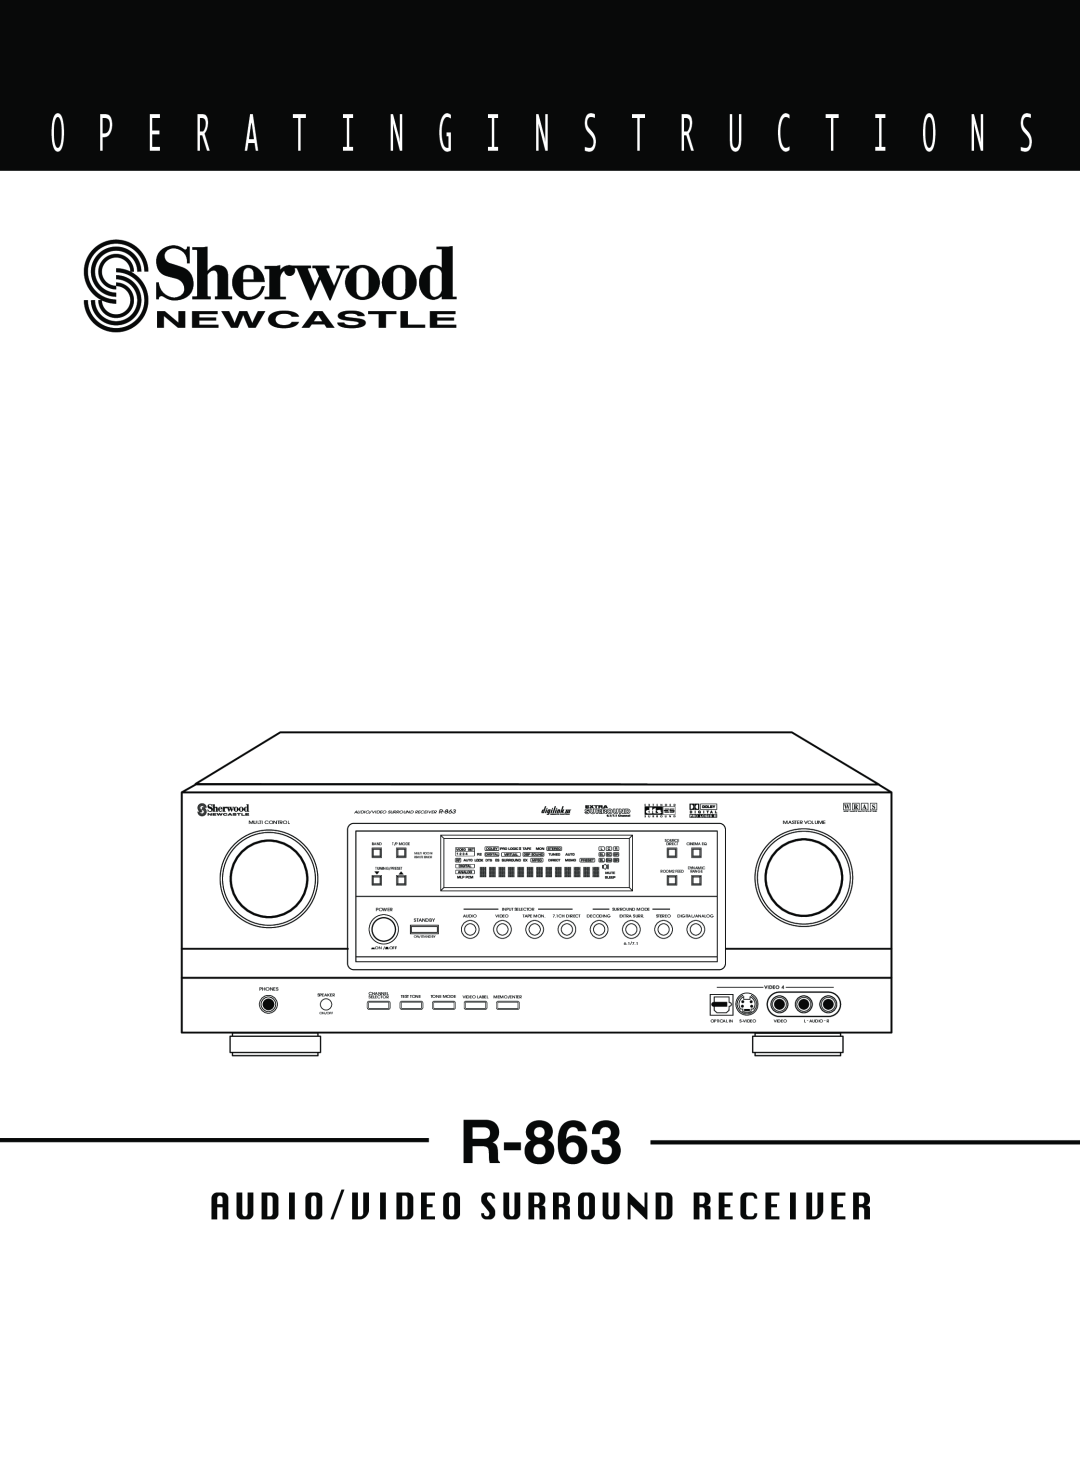 Sherwood R-863 manual O P E R A T I N G I N S T R U C T I O N S, Audio/Video Surround Receiver, W R A S 